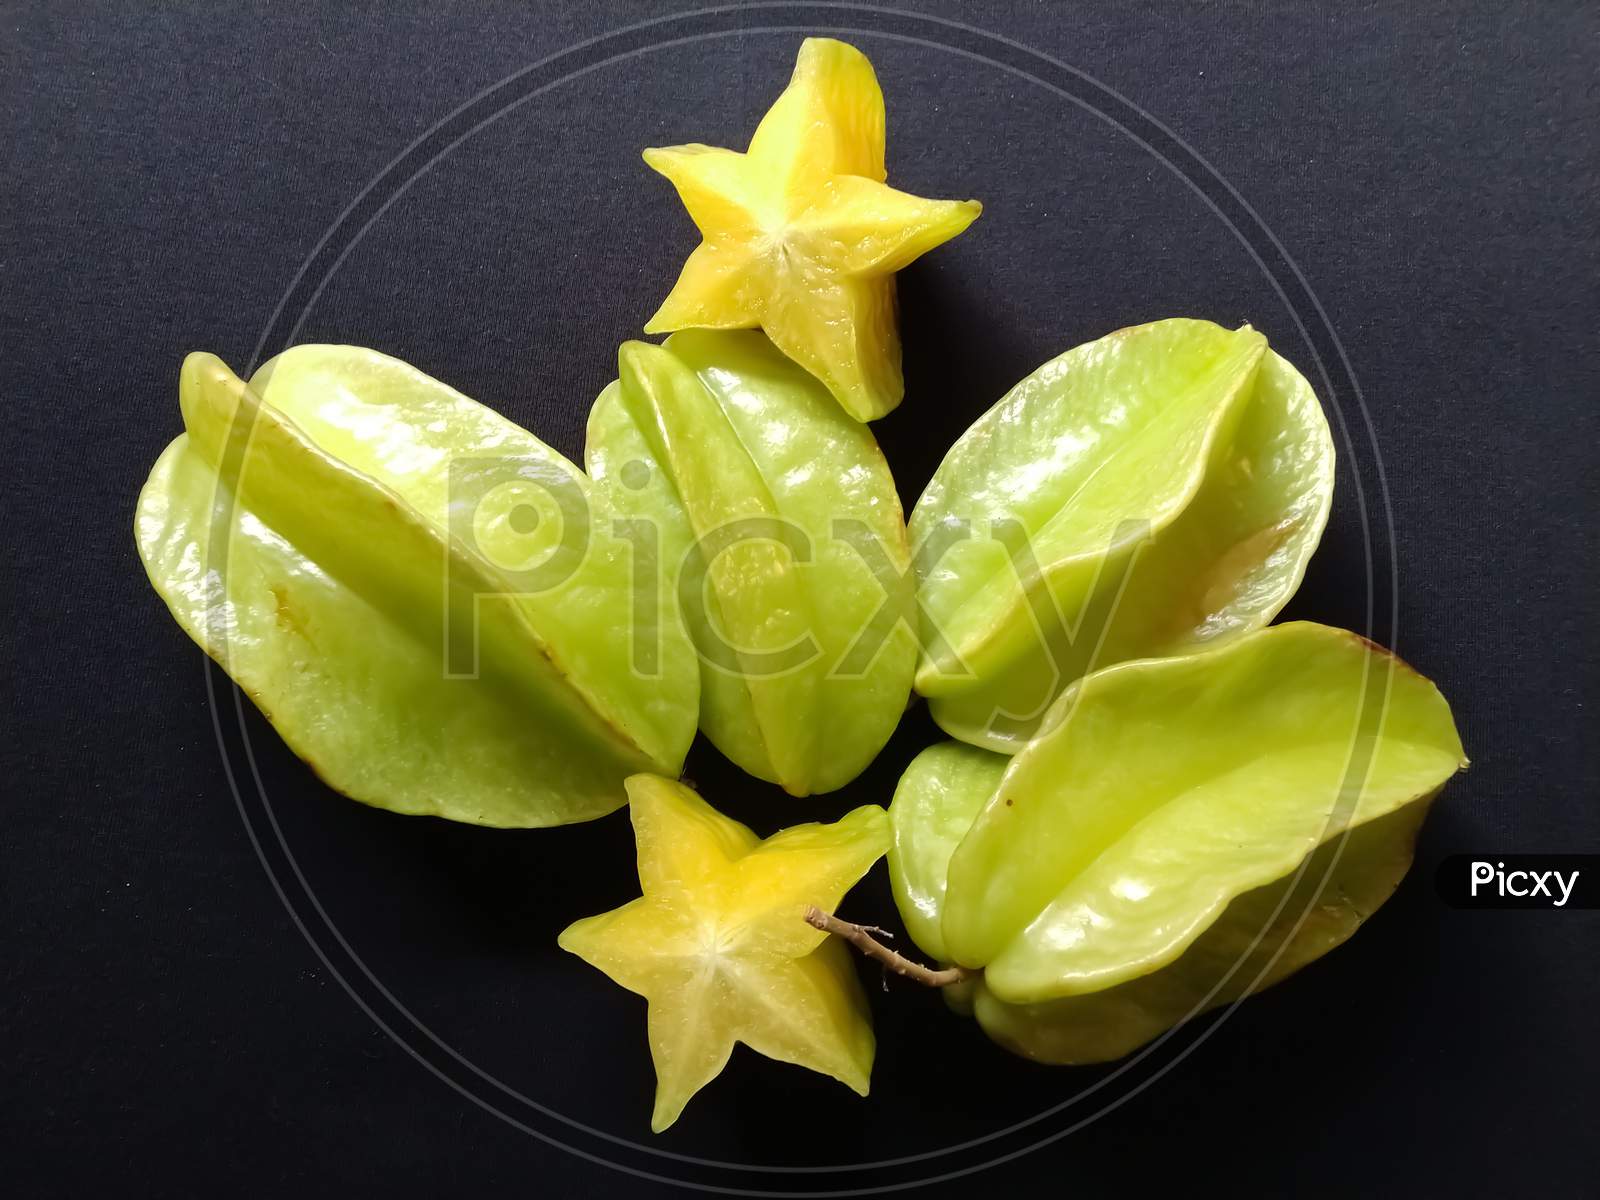 Star fruit in a black background